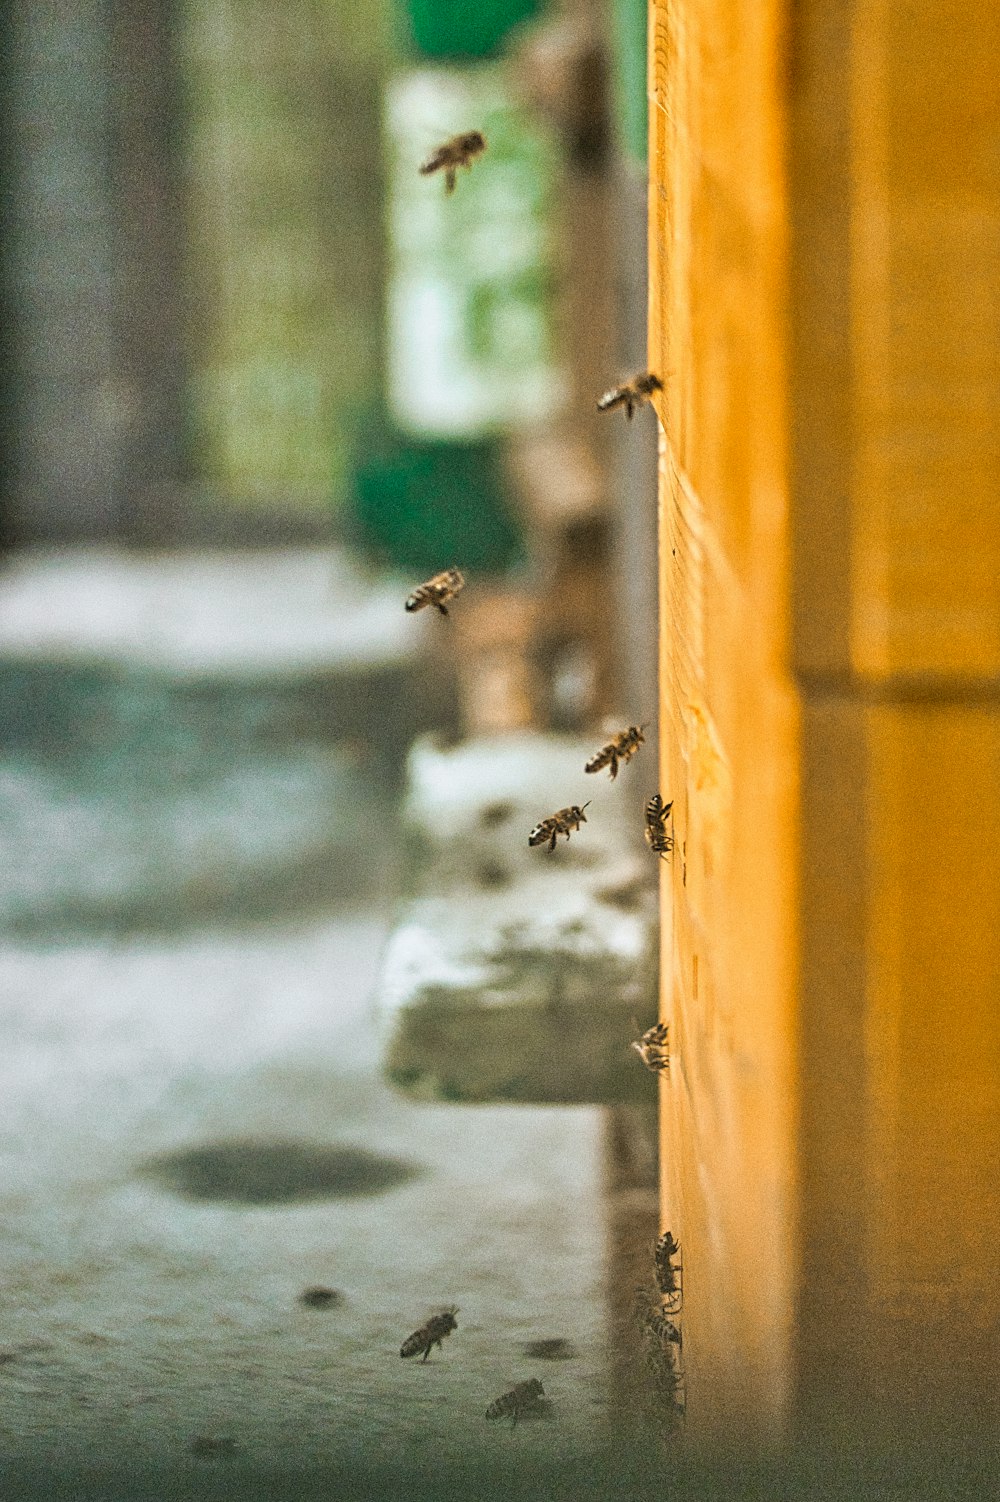 a group of bees flying around a building